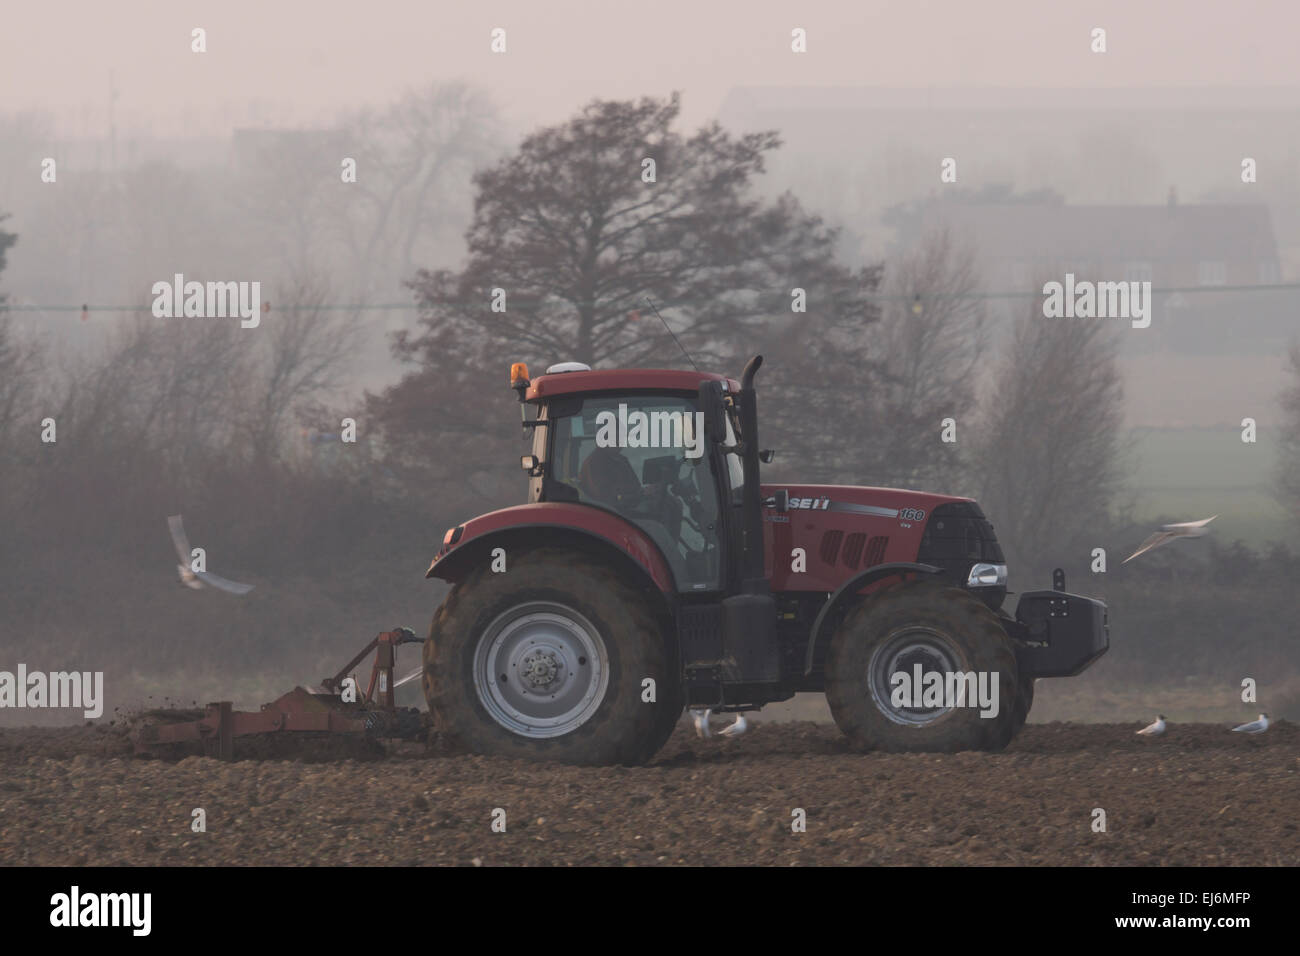 A red tractor plows this field, during a foggy day. seagulls fly around the tractor hoping they will get something. Stock Photo